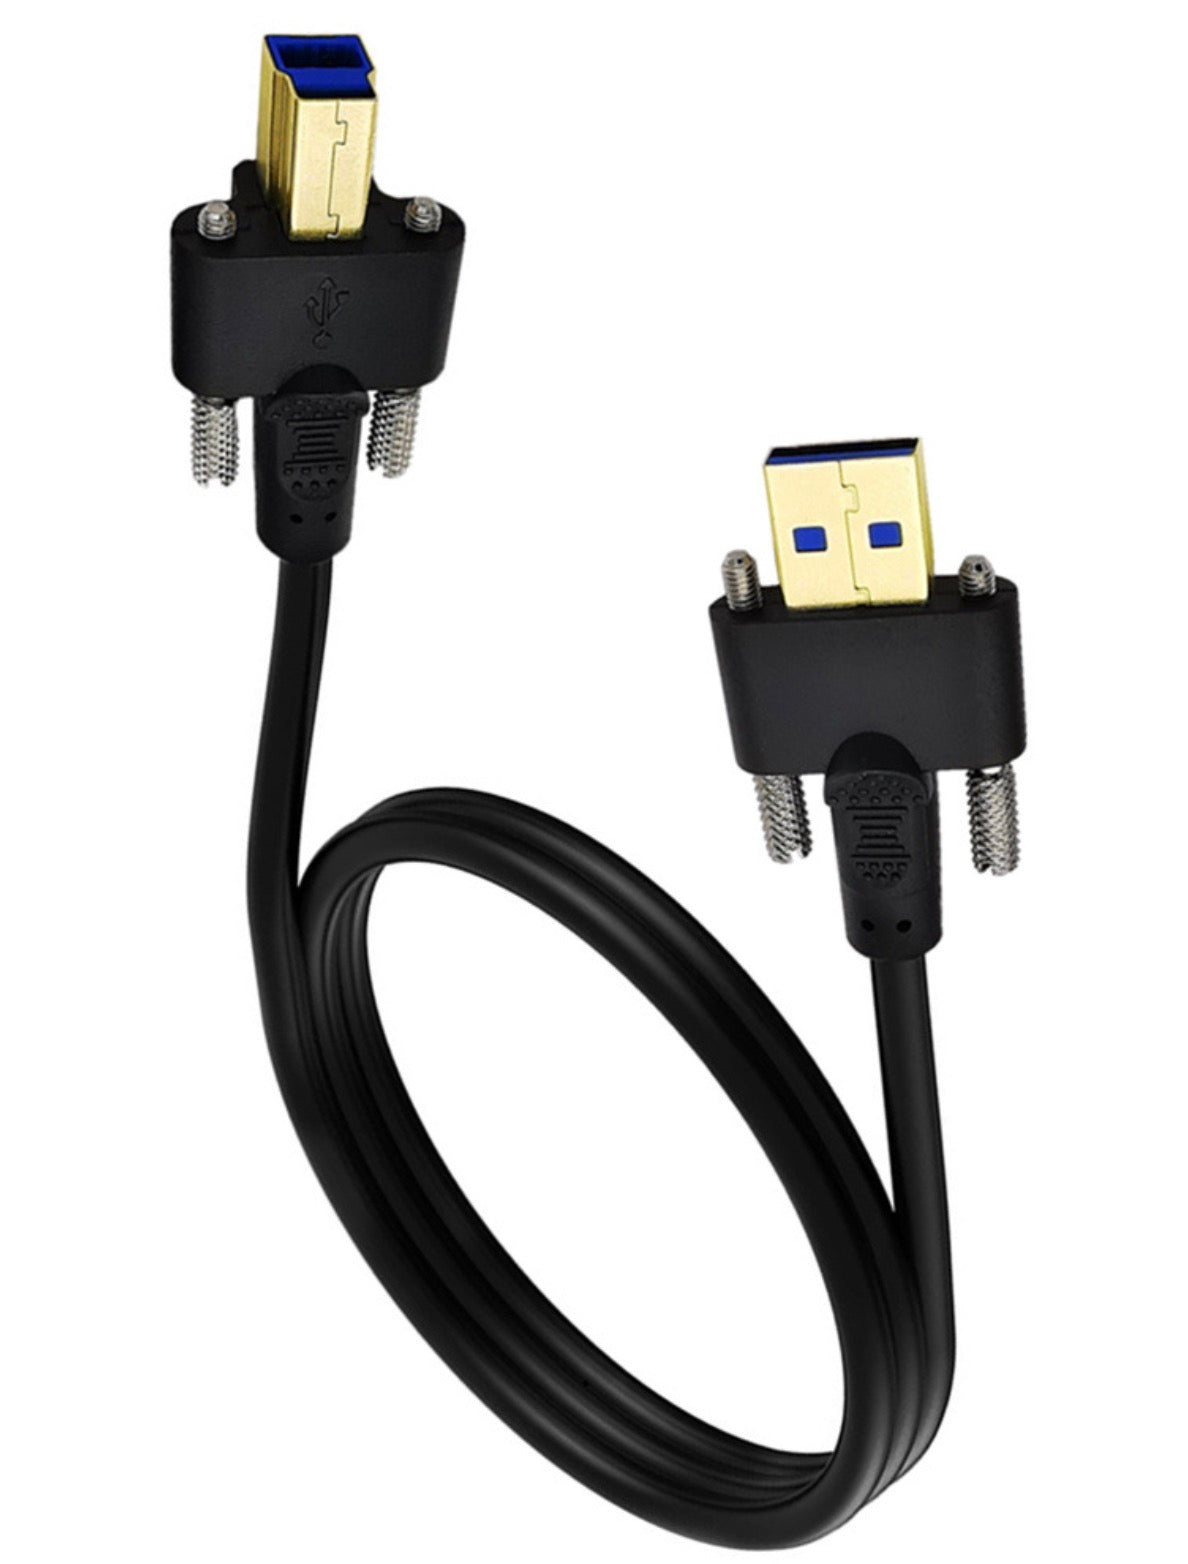 USB 3.0 A Male to B Male Cable with Dual M3 Screw Lock Mechanism